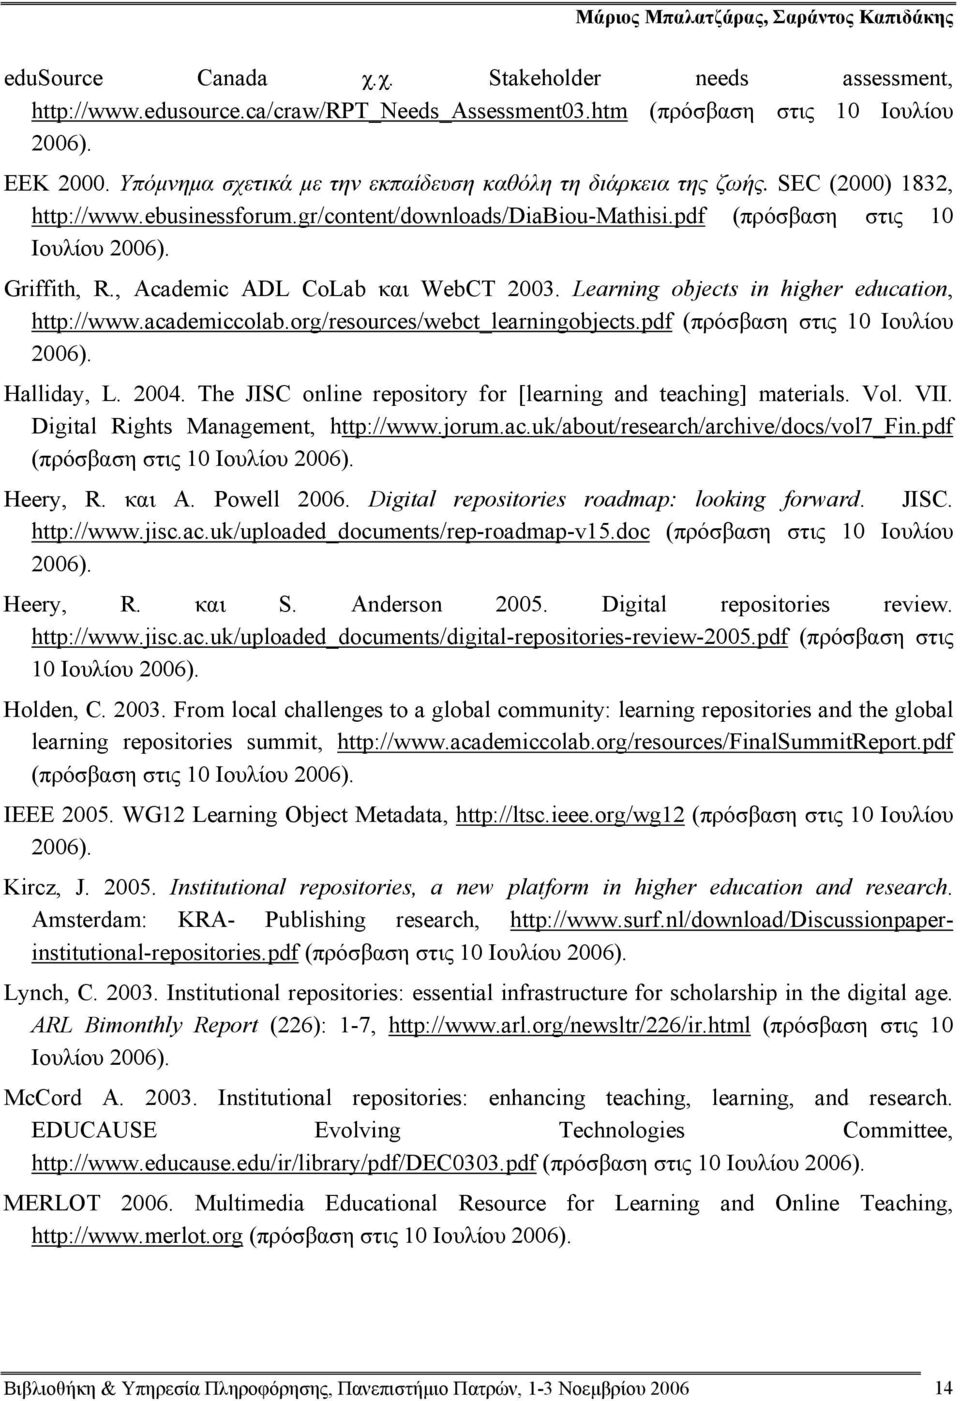 , Academic ADL CoLab και WebCT 2003. Learning objects in higher education, http://www.academiccolab.org/resources/webct_learningobjects.pdf (πρόσβαση στις 10 Ιουλίου 2006). Halliday, L. 2004.